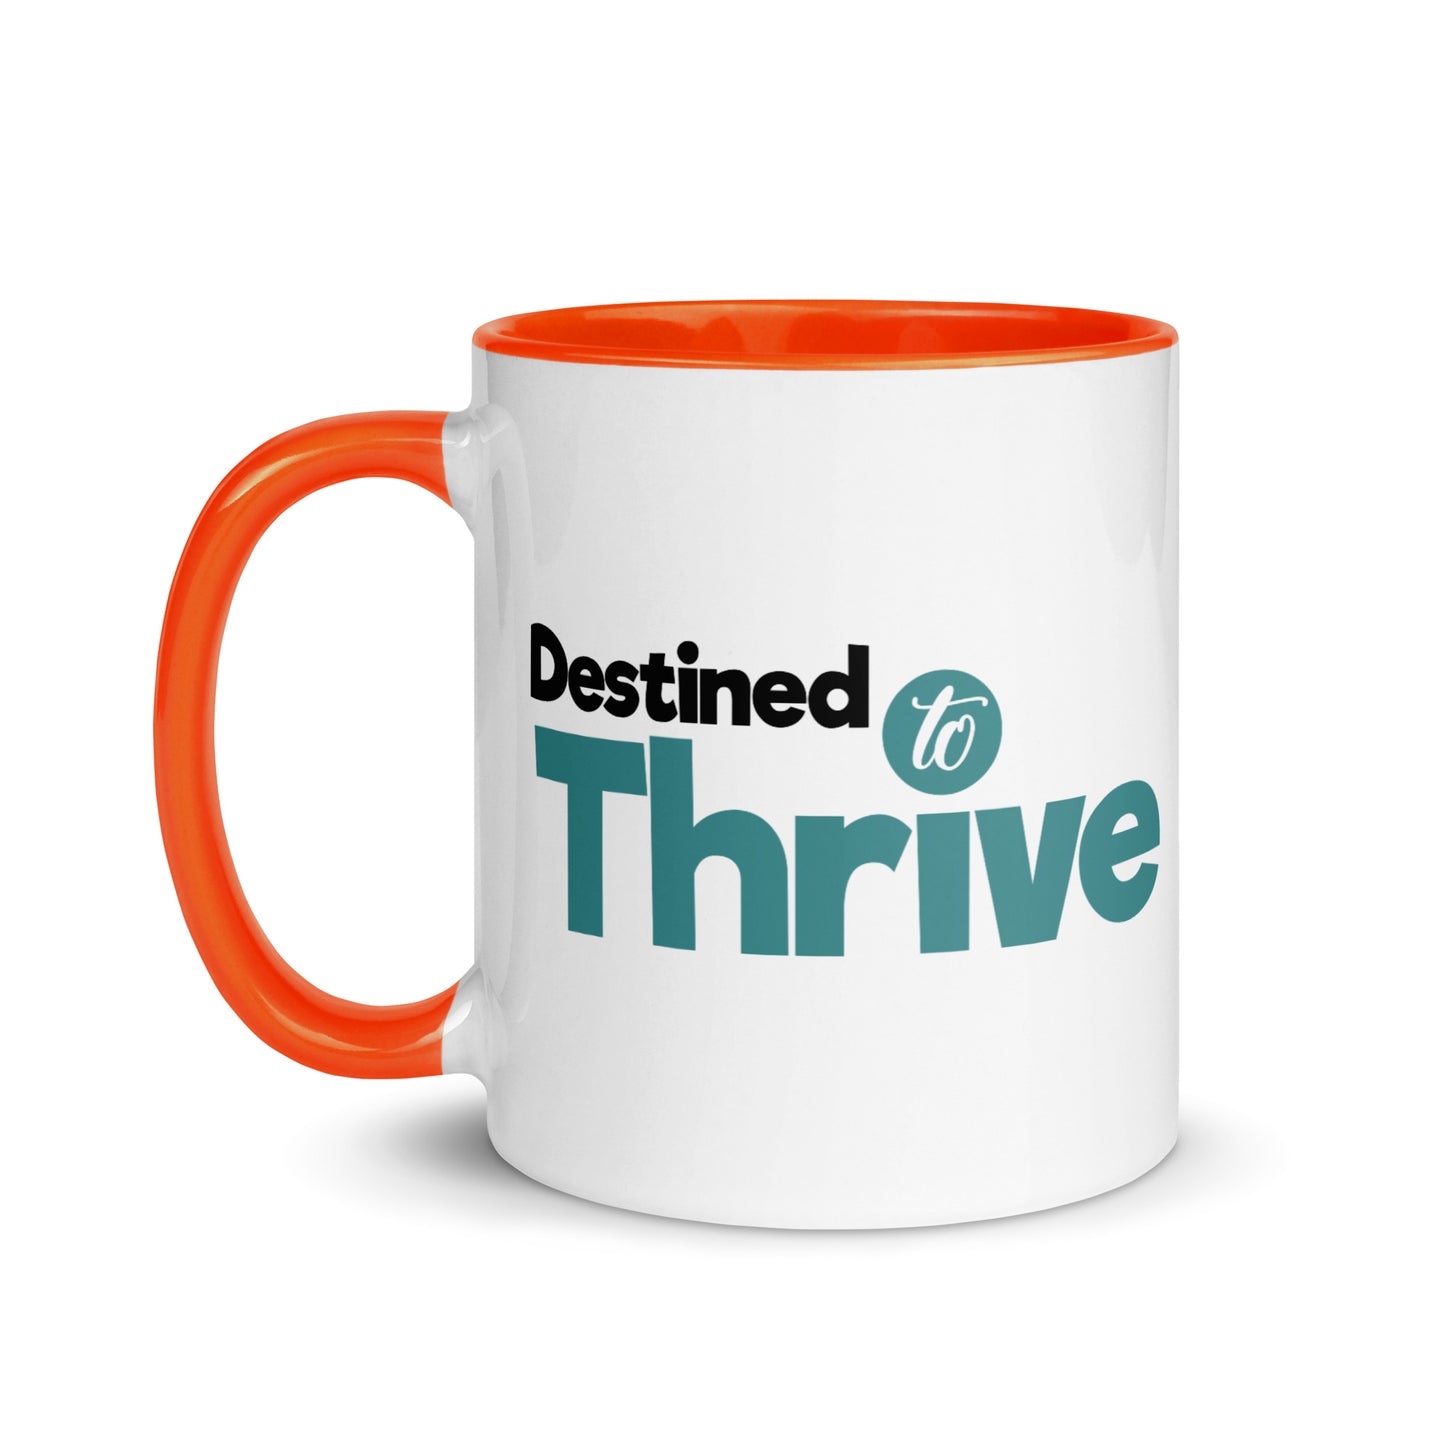 "Vibrant Triumph: Double-Printed ‘Destined To Thrive’ Color-Accented Ceramic Mug